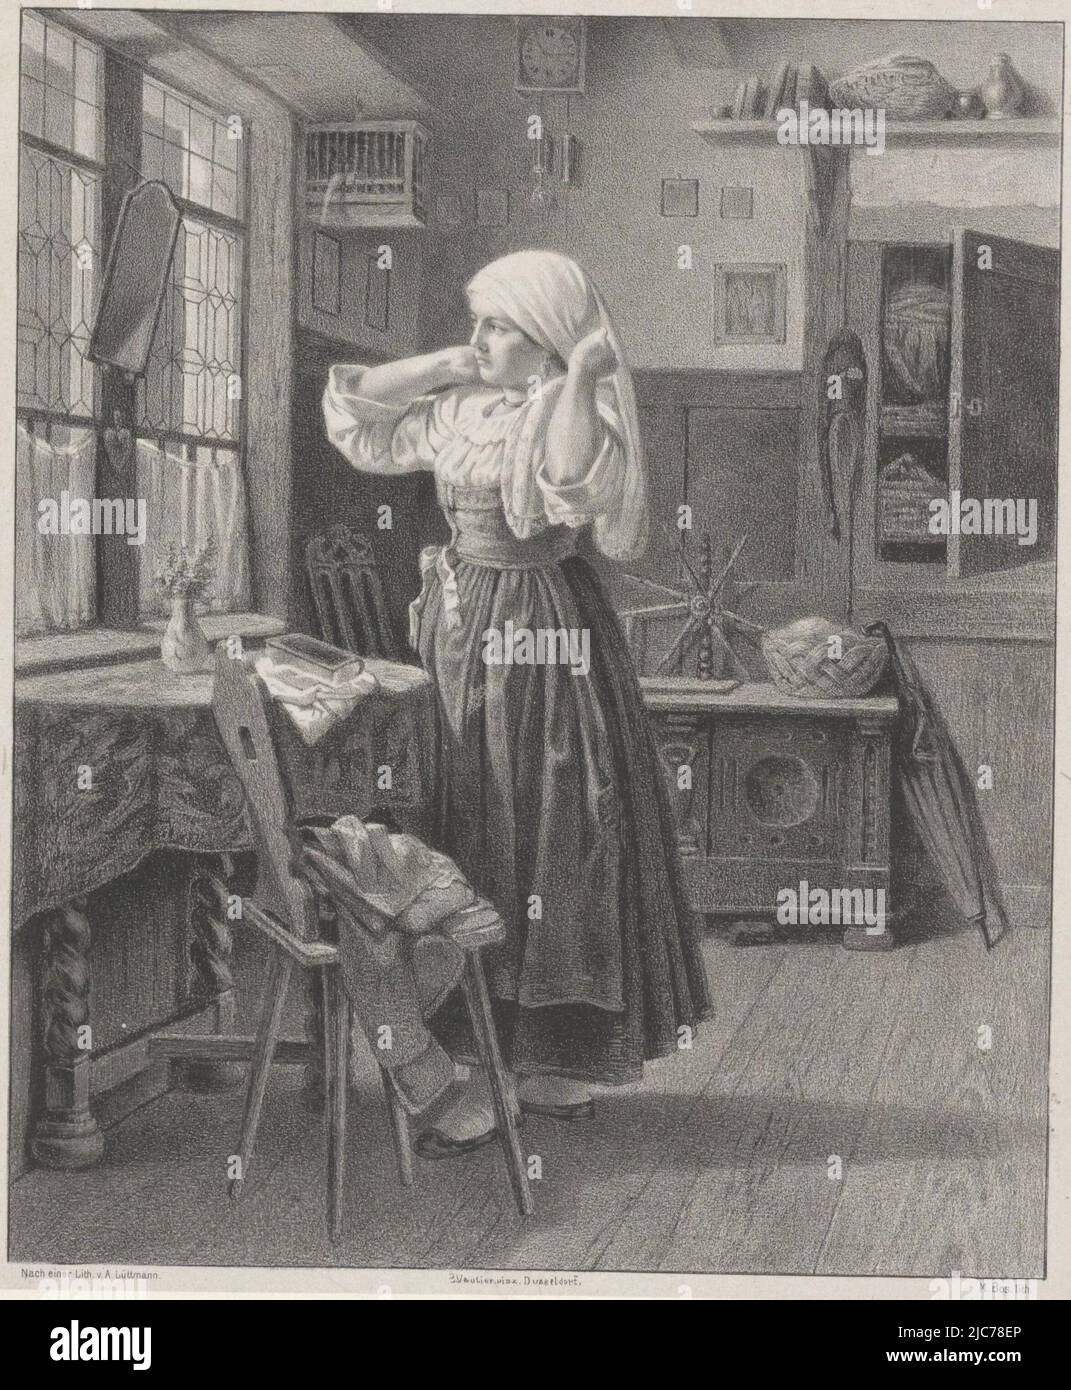 The woman looks into the mirror as she ties her kerchief. On the chair near the table is a coat. Behind her, the door to a closet is open, Woman dresses by the window Morgentoilette am Sonntage , print maker: Maarten Bos Jz., (mentioned on object), A. Lüttmann, (mentioned on object), after: Benjamin Vautier, (mentioned on object), print maker: Netherlands, after: Düsseldorf, 1841 - 1902, paper, h 418 mm × w 305 mm Stock Photo